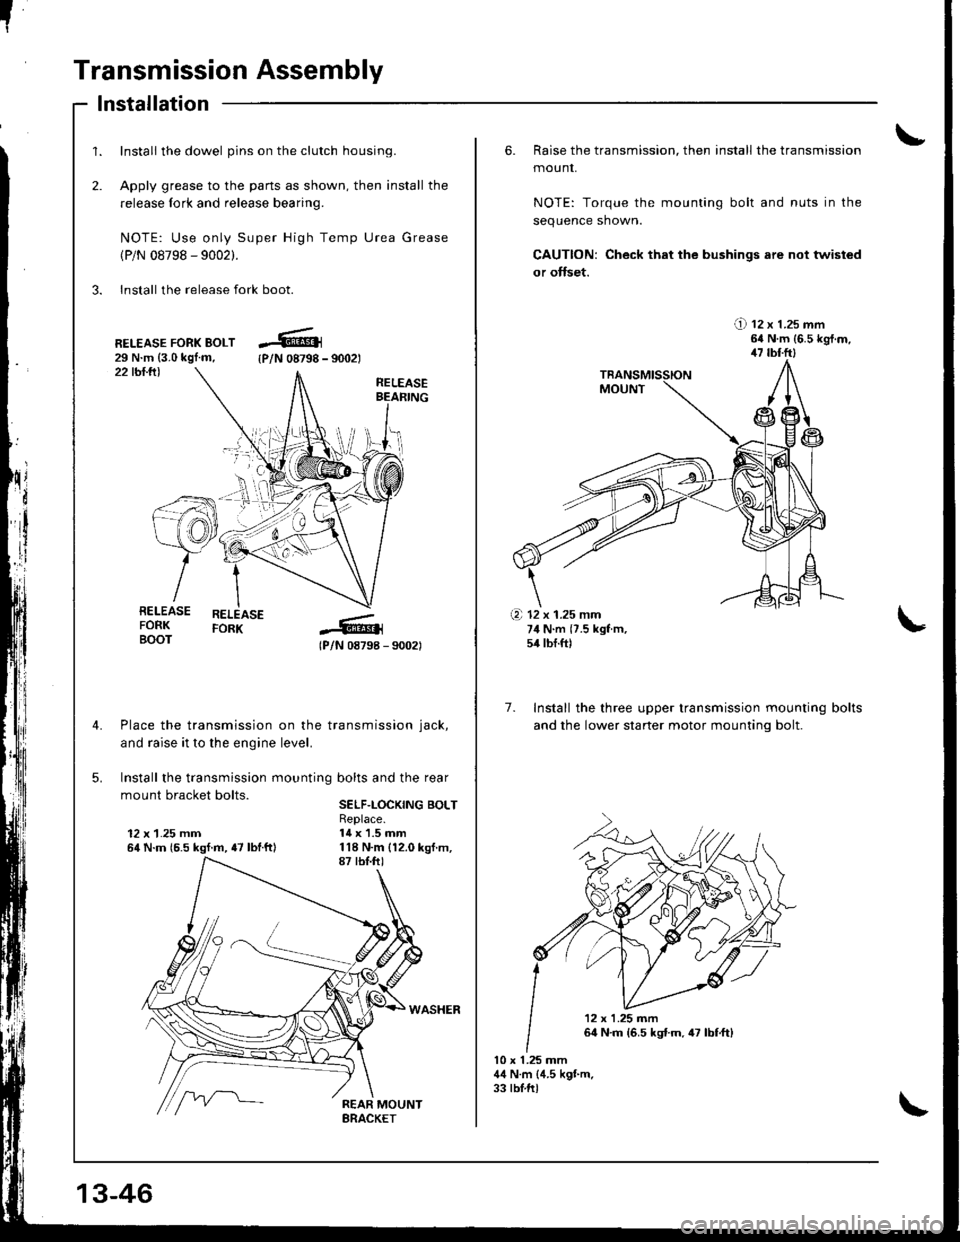 HONDA INTEGRA 1998 4.G Workshop Manual I
Transmission Assembly
1.
2.
Install the dowel pins on the clutch housing.
Apply grease to the parts as shown, then install the
release fork and release bearing.
NOTE: Use only Super High Temp Urea G